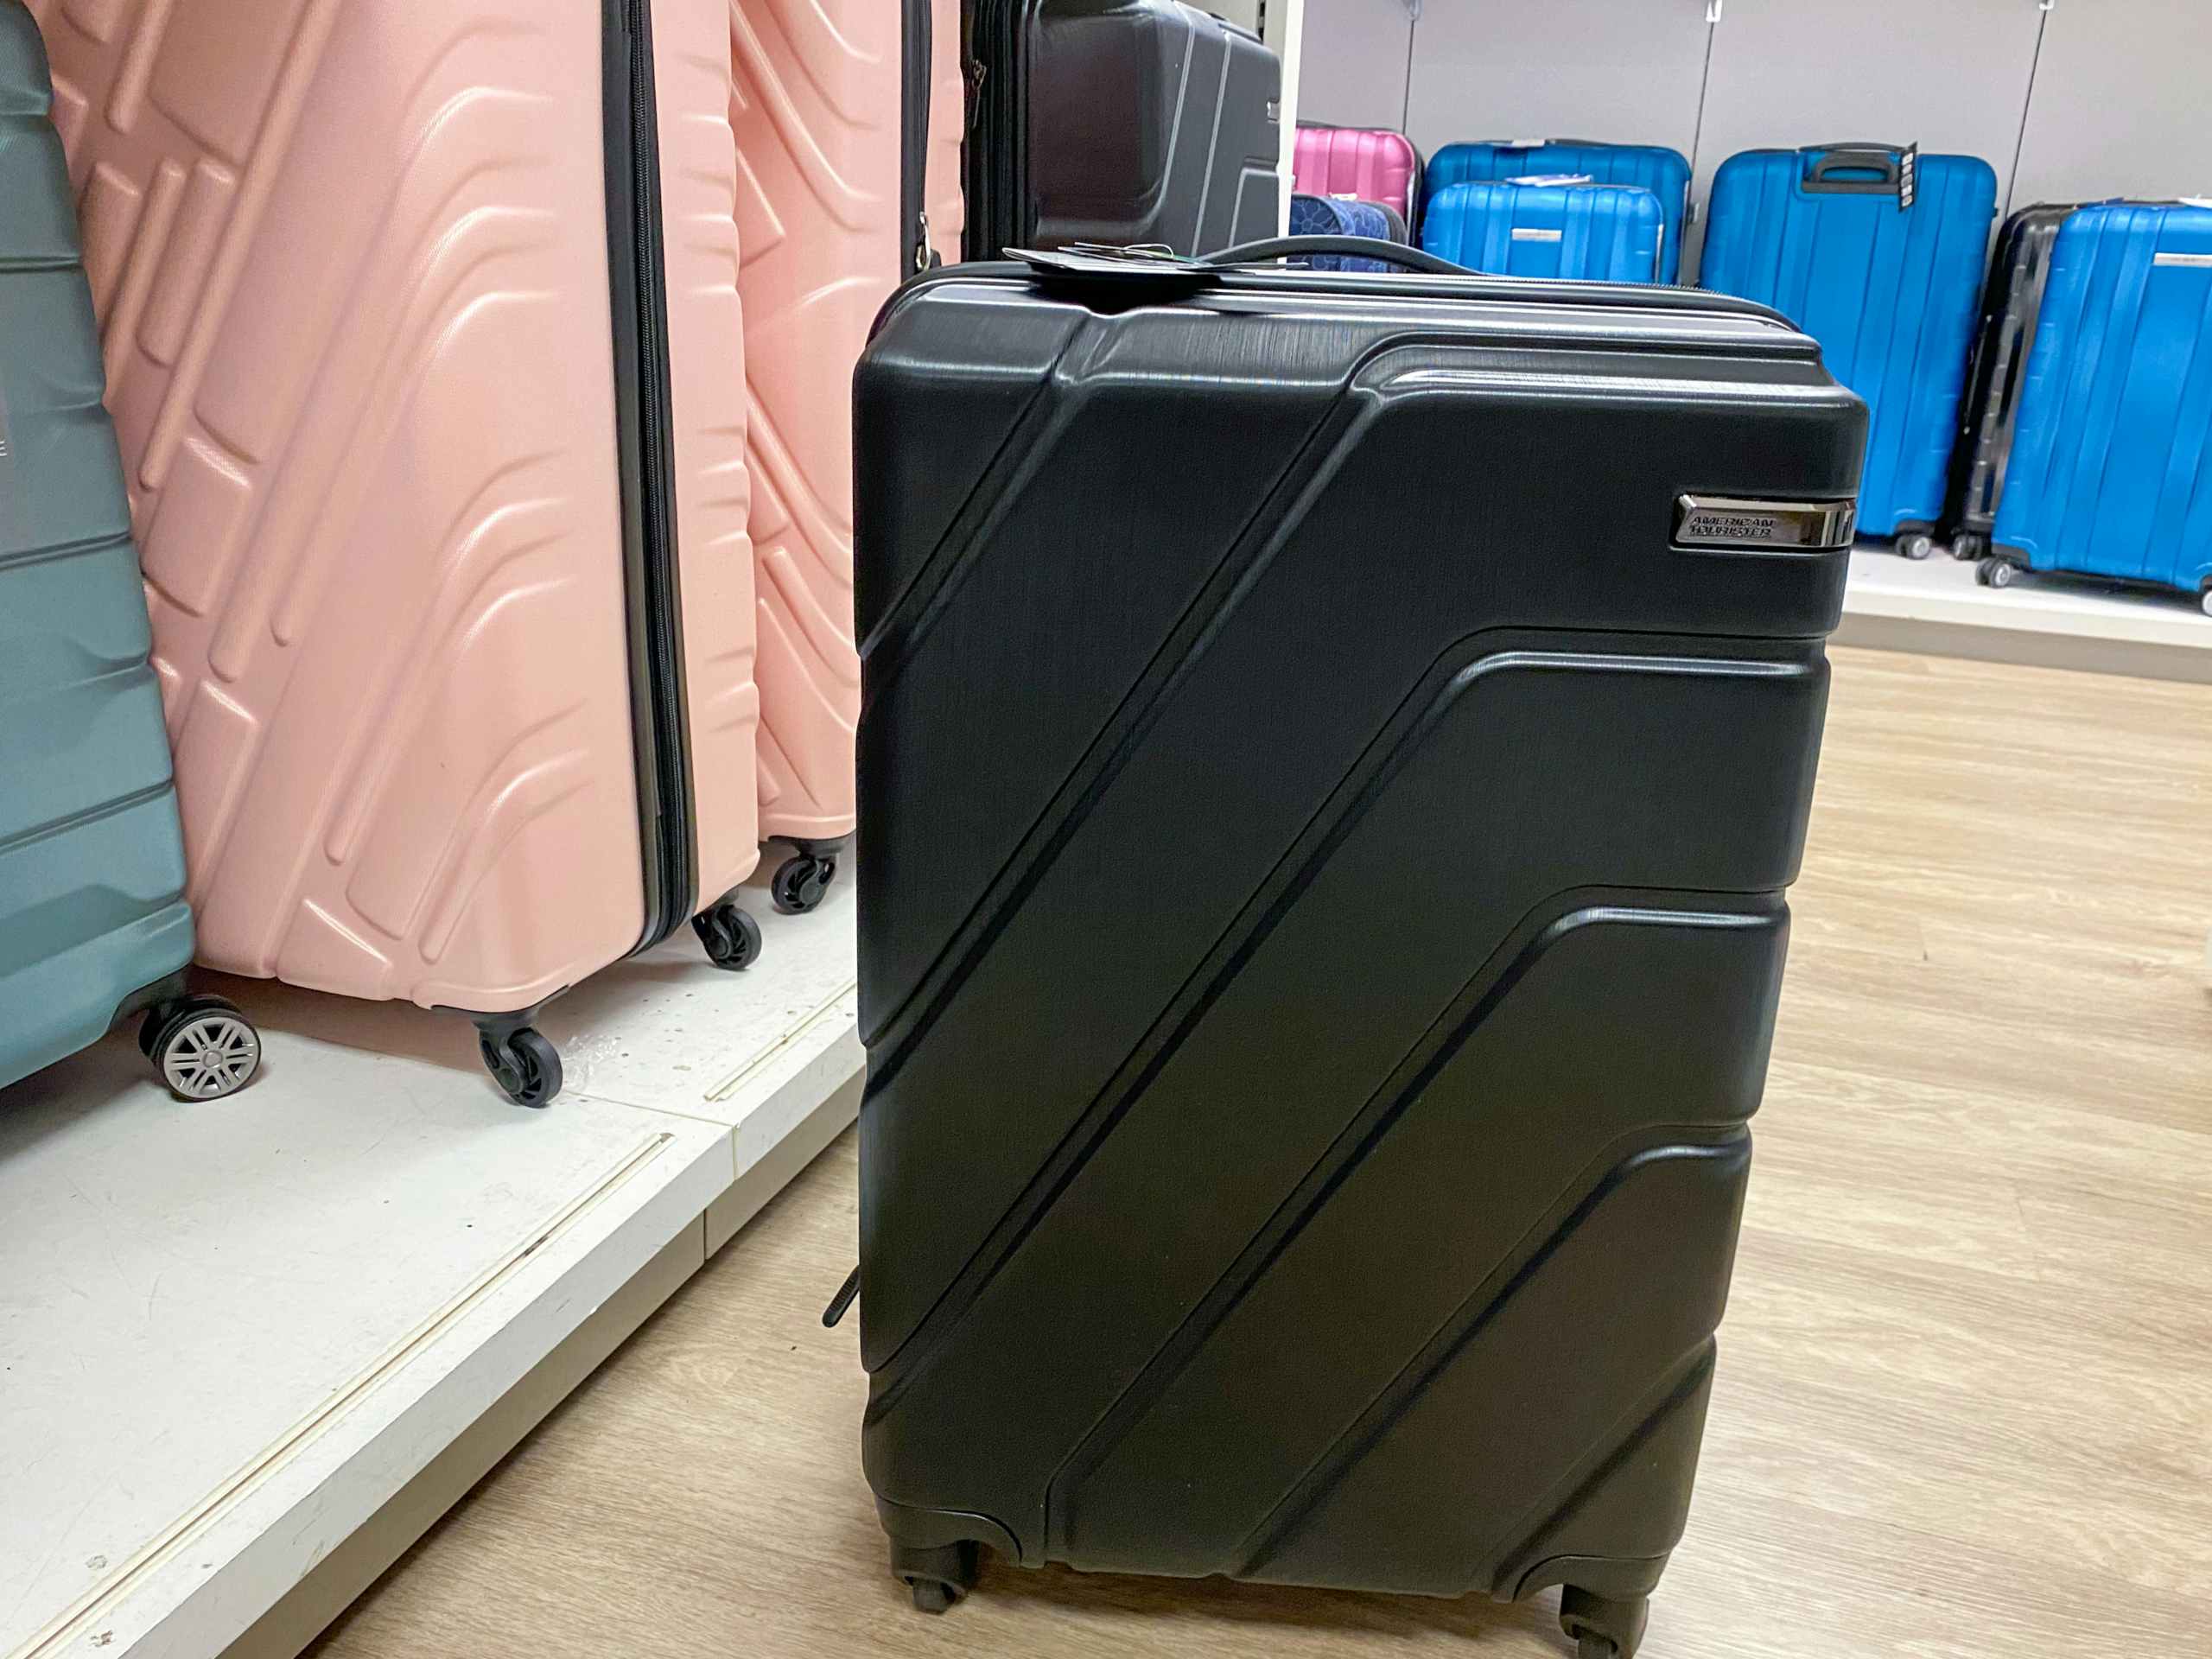 luggage on the floor next to a shelf of other luggages